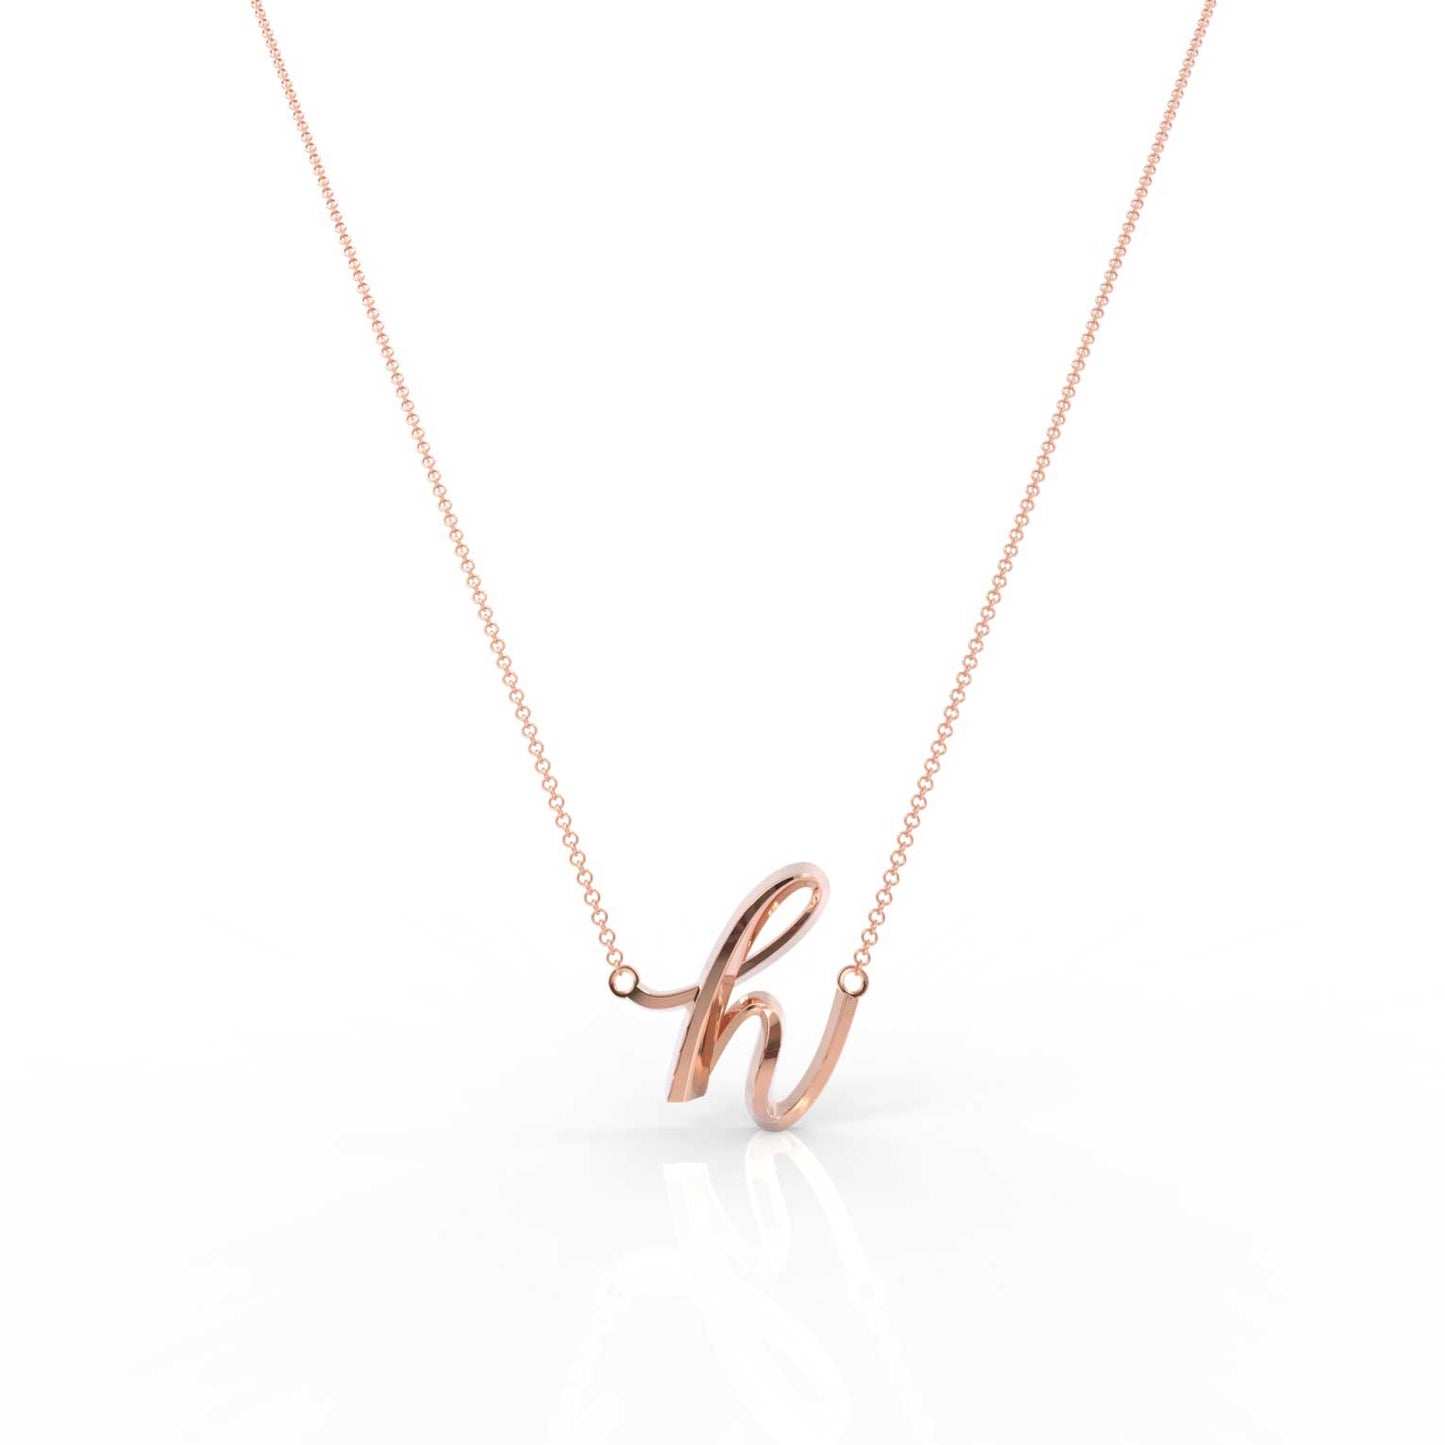 The Love Collect - "H" Necklace